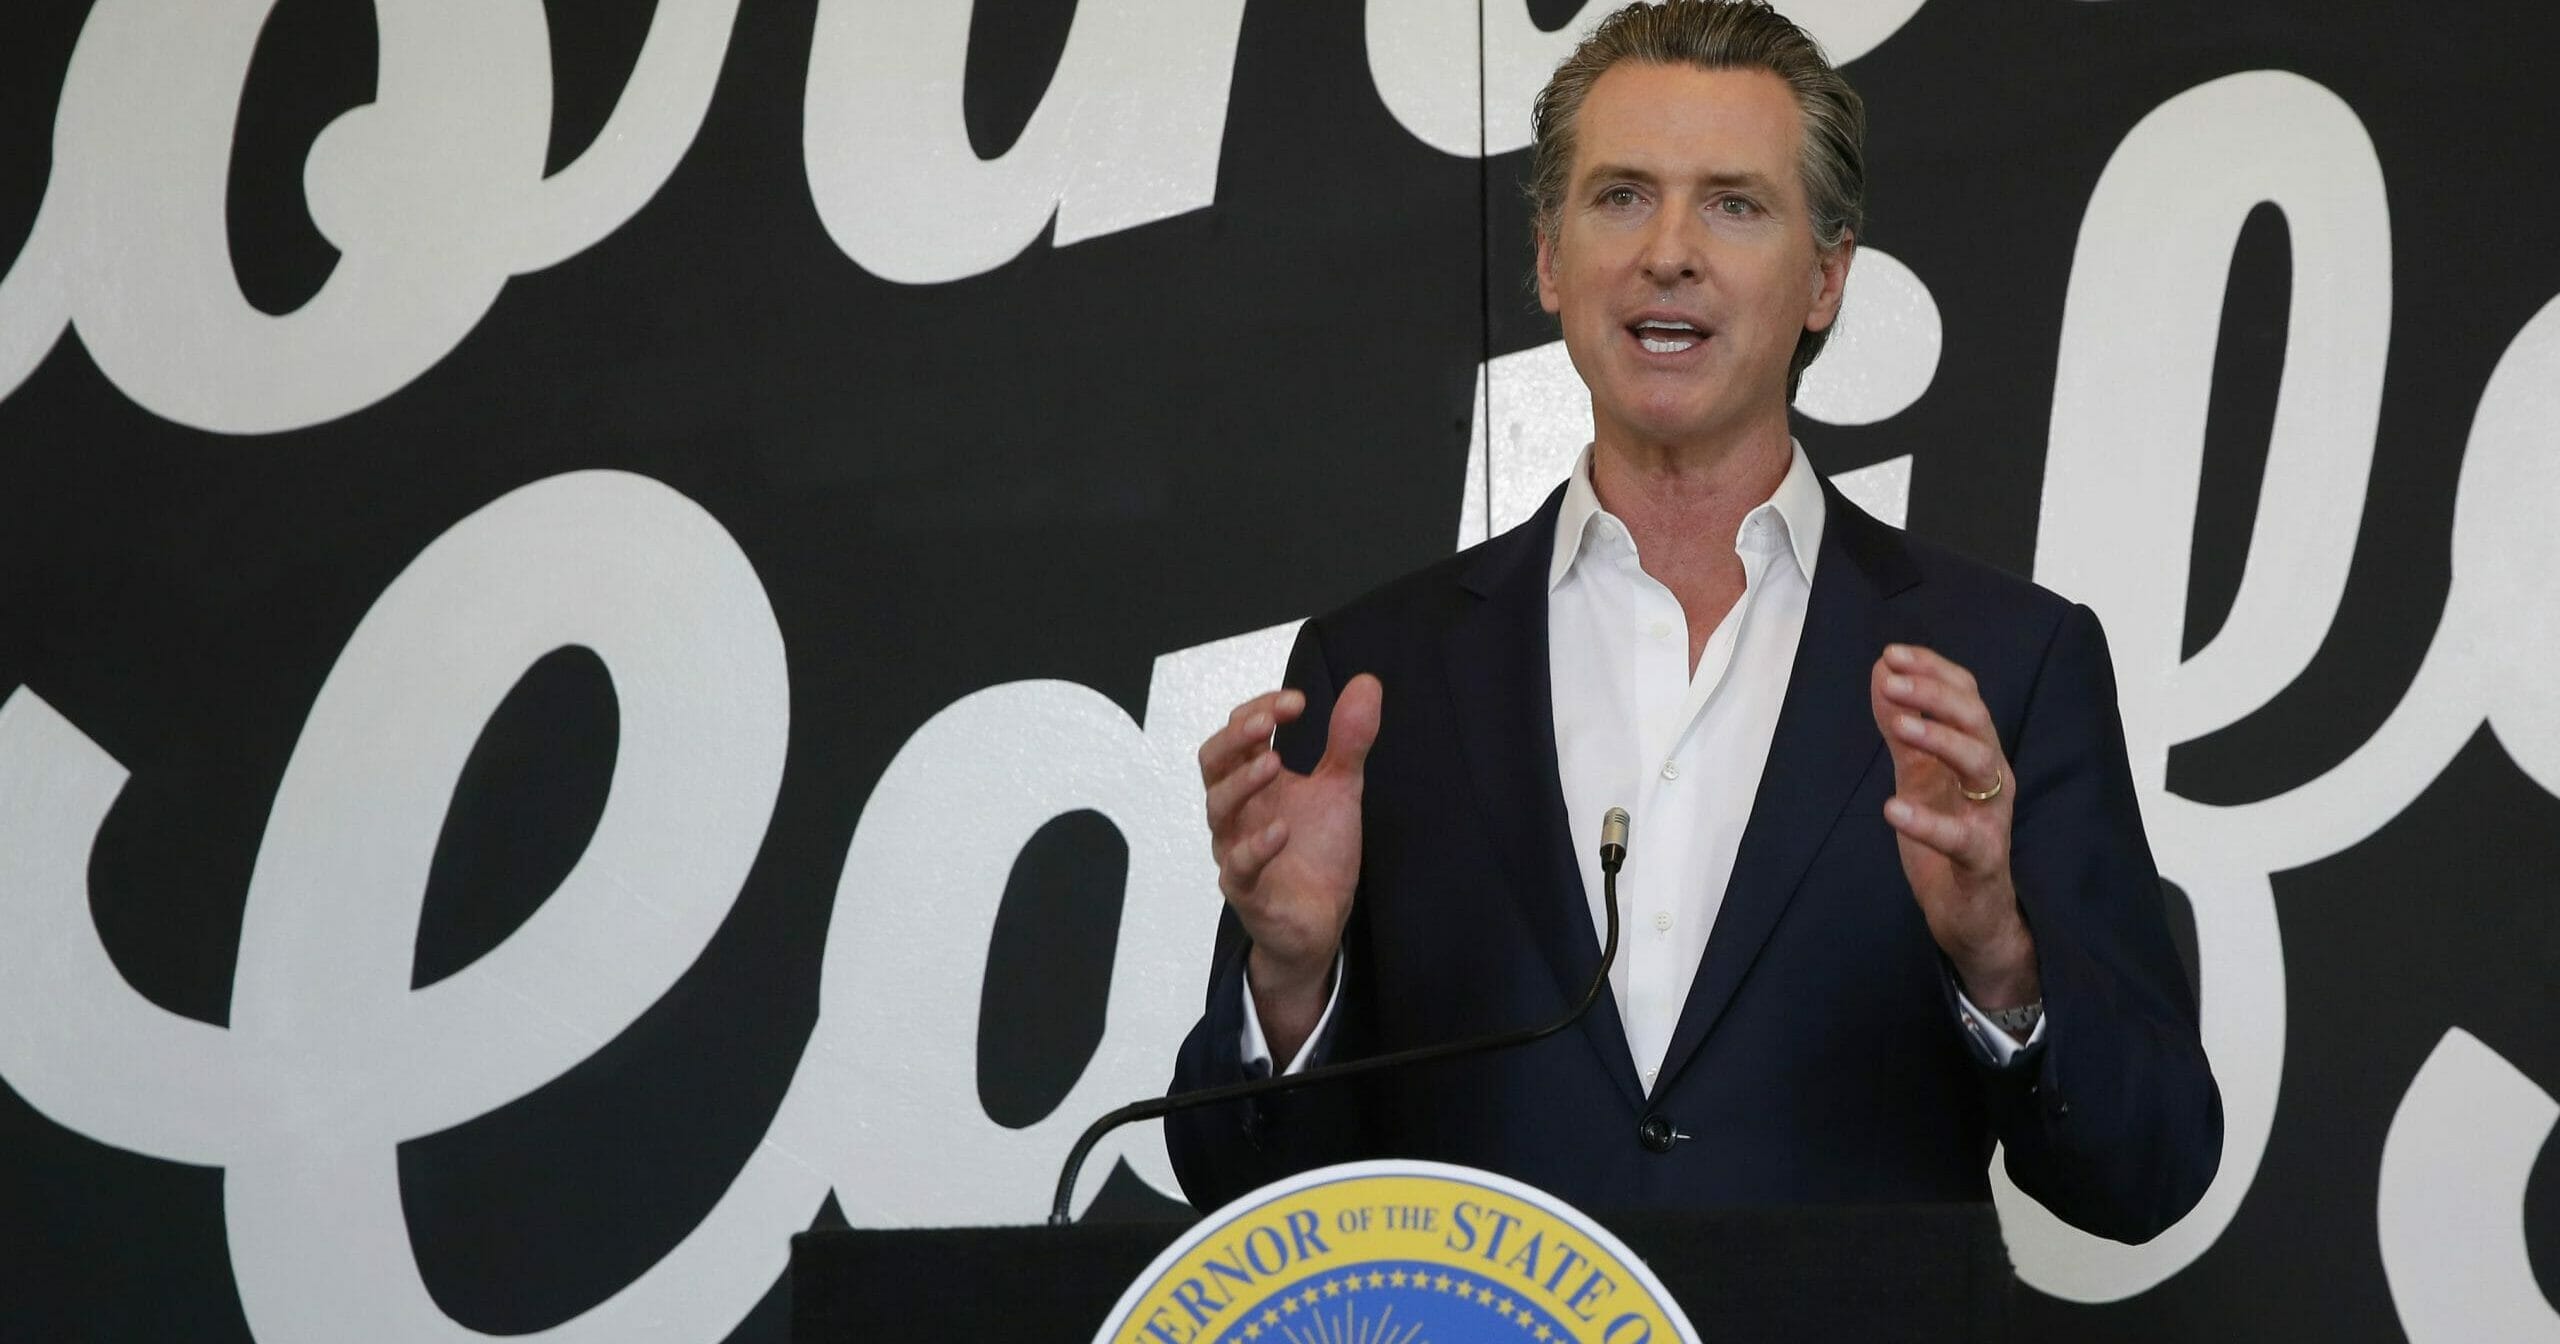 Gov. Gavin Newsom discusses his plan for the gradual reopening of California businesses during a news conference at the Display California store in Sacramento, California, on May 5, 2020.